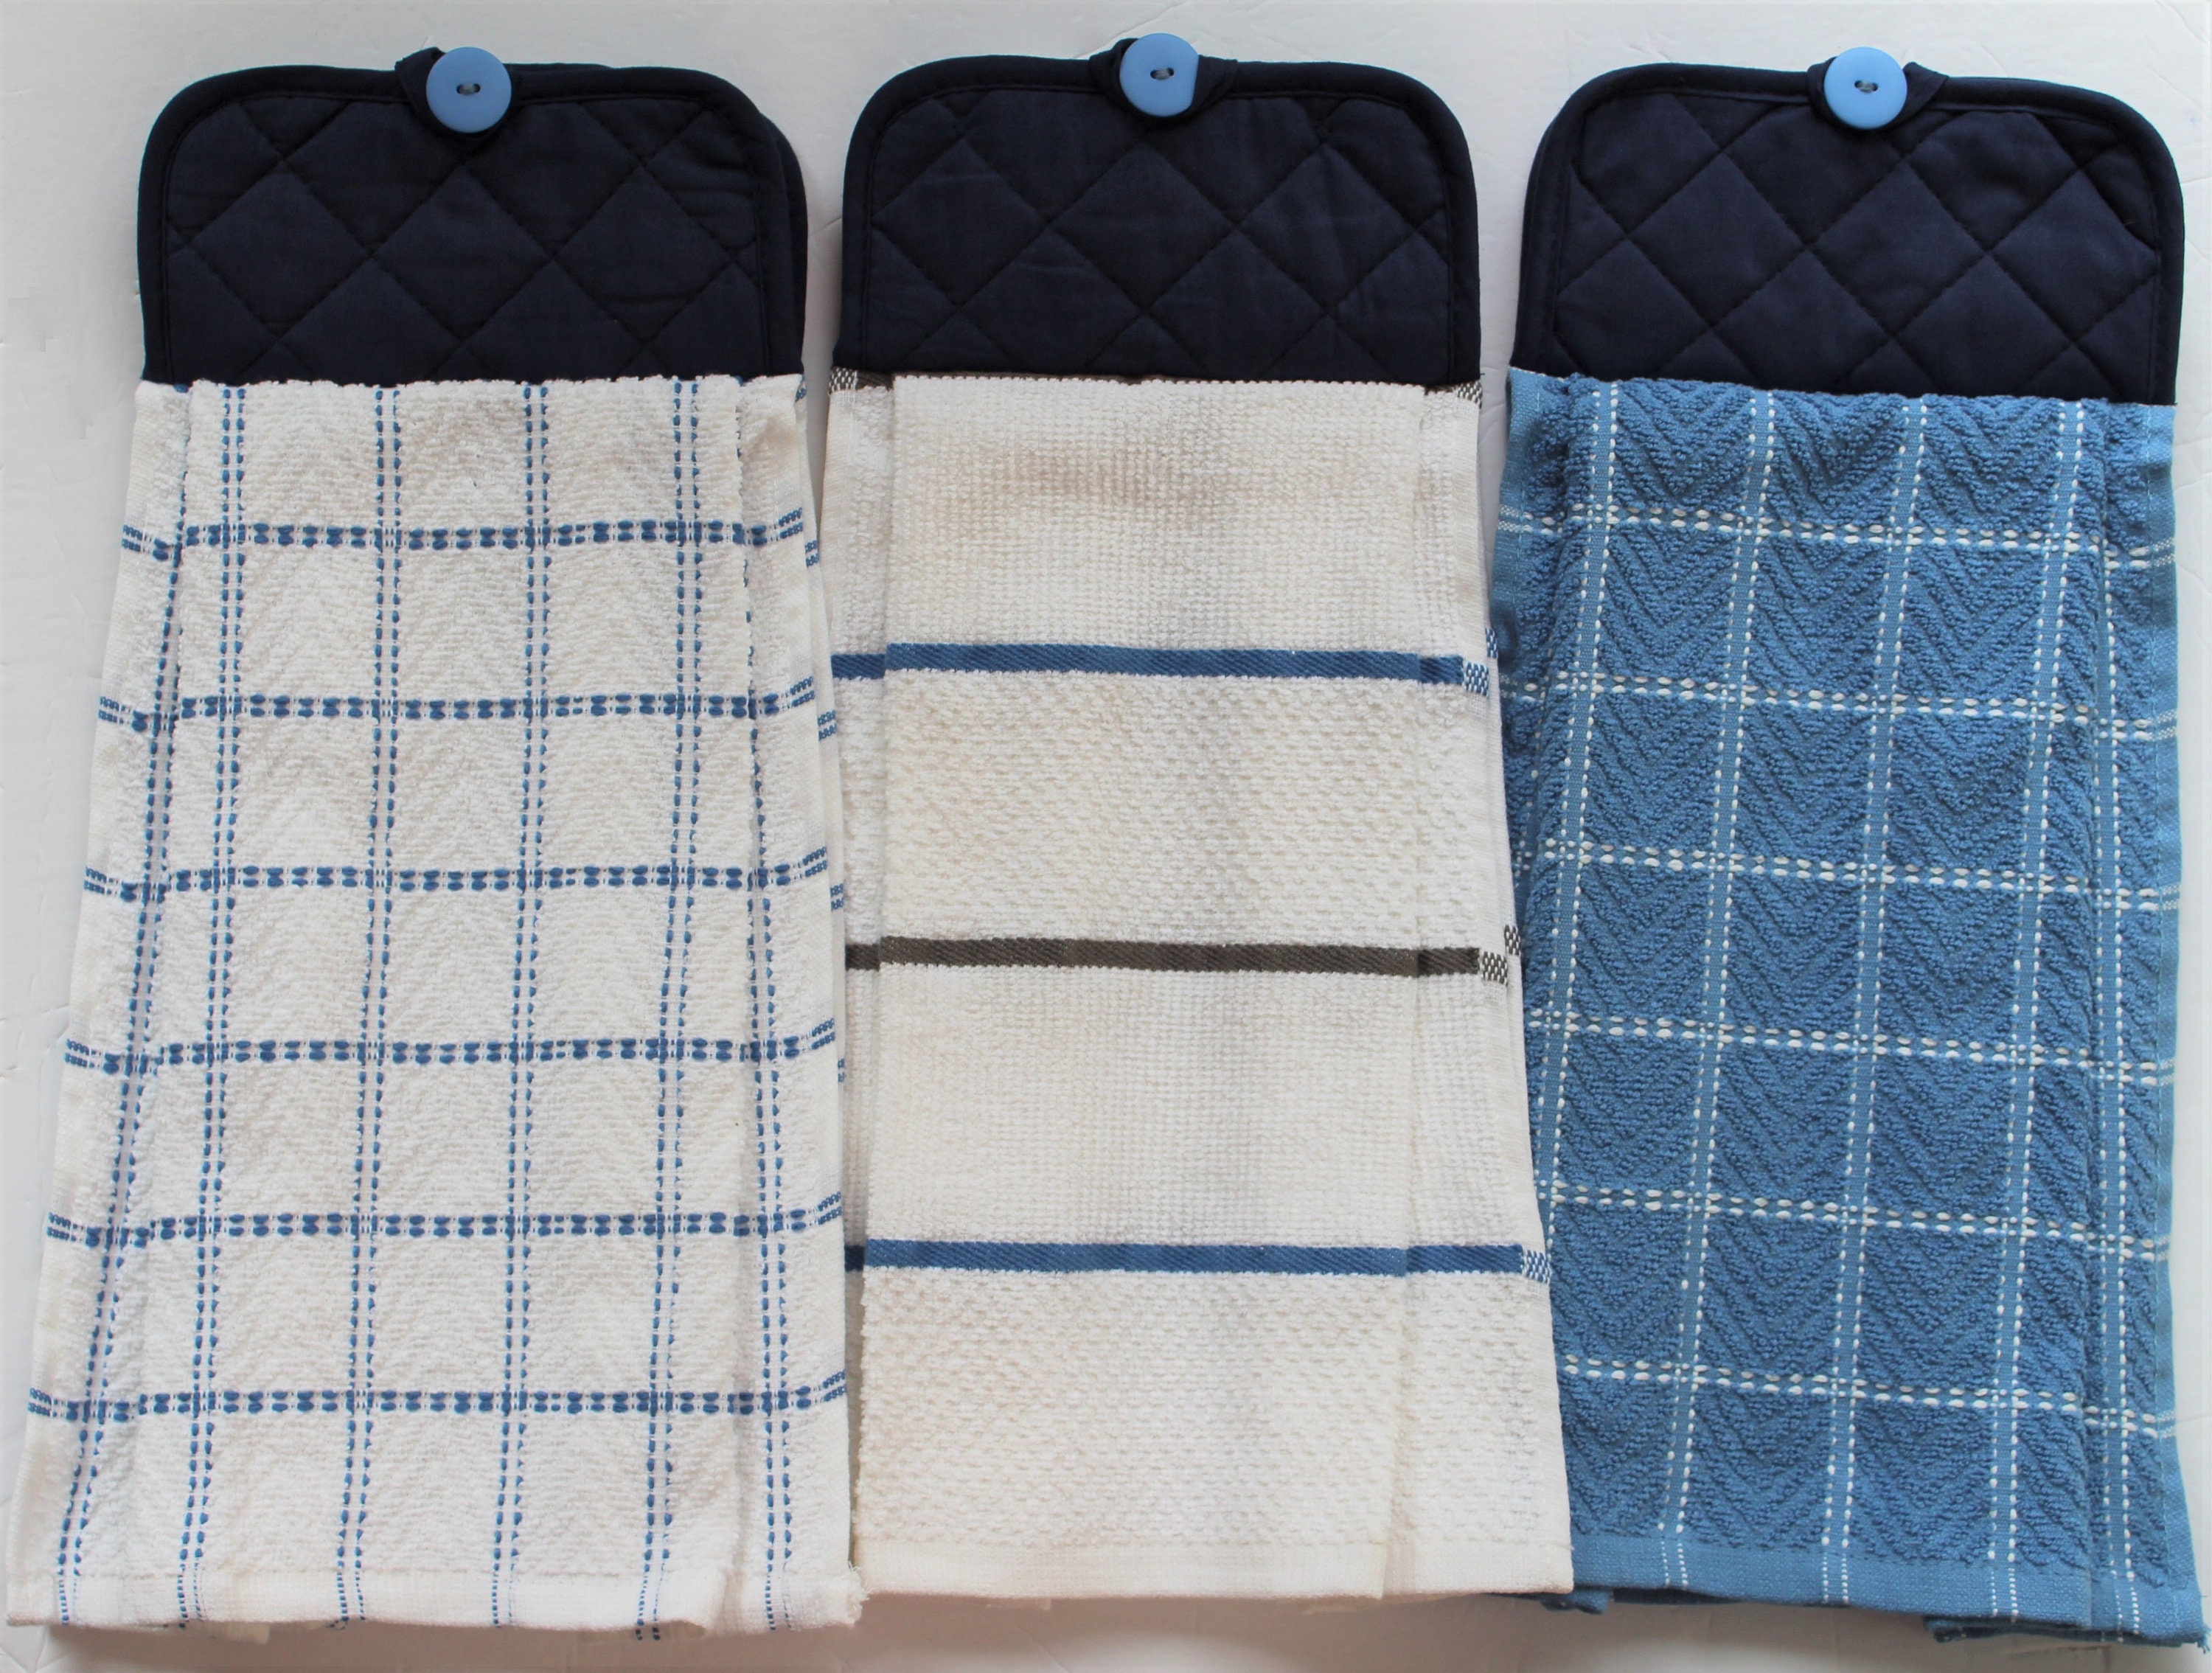 Williamsburg Plaid Hand Towel available in Black, Colonial Blue